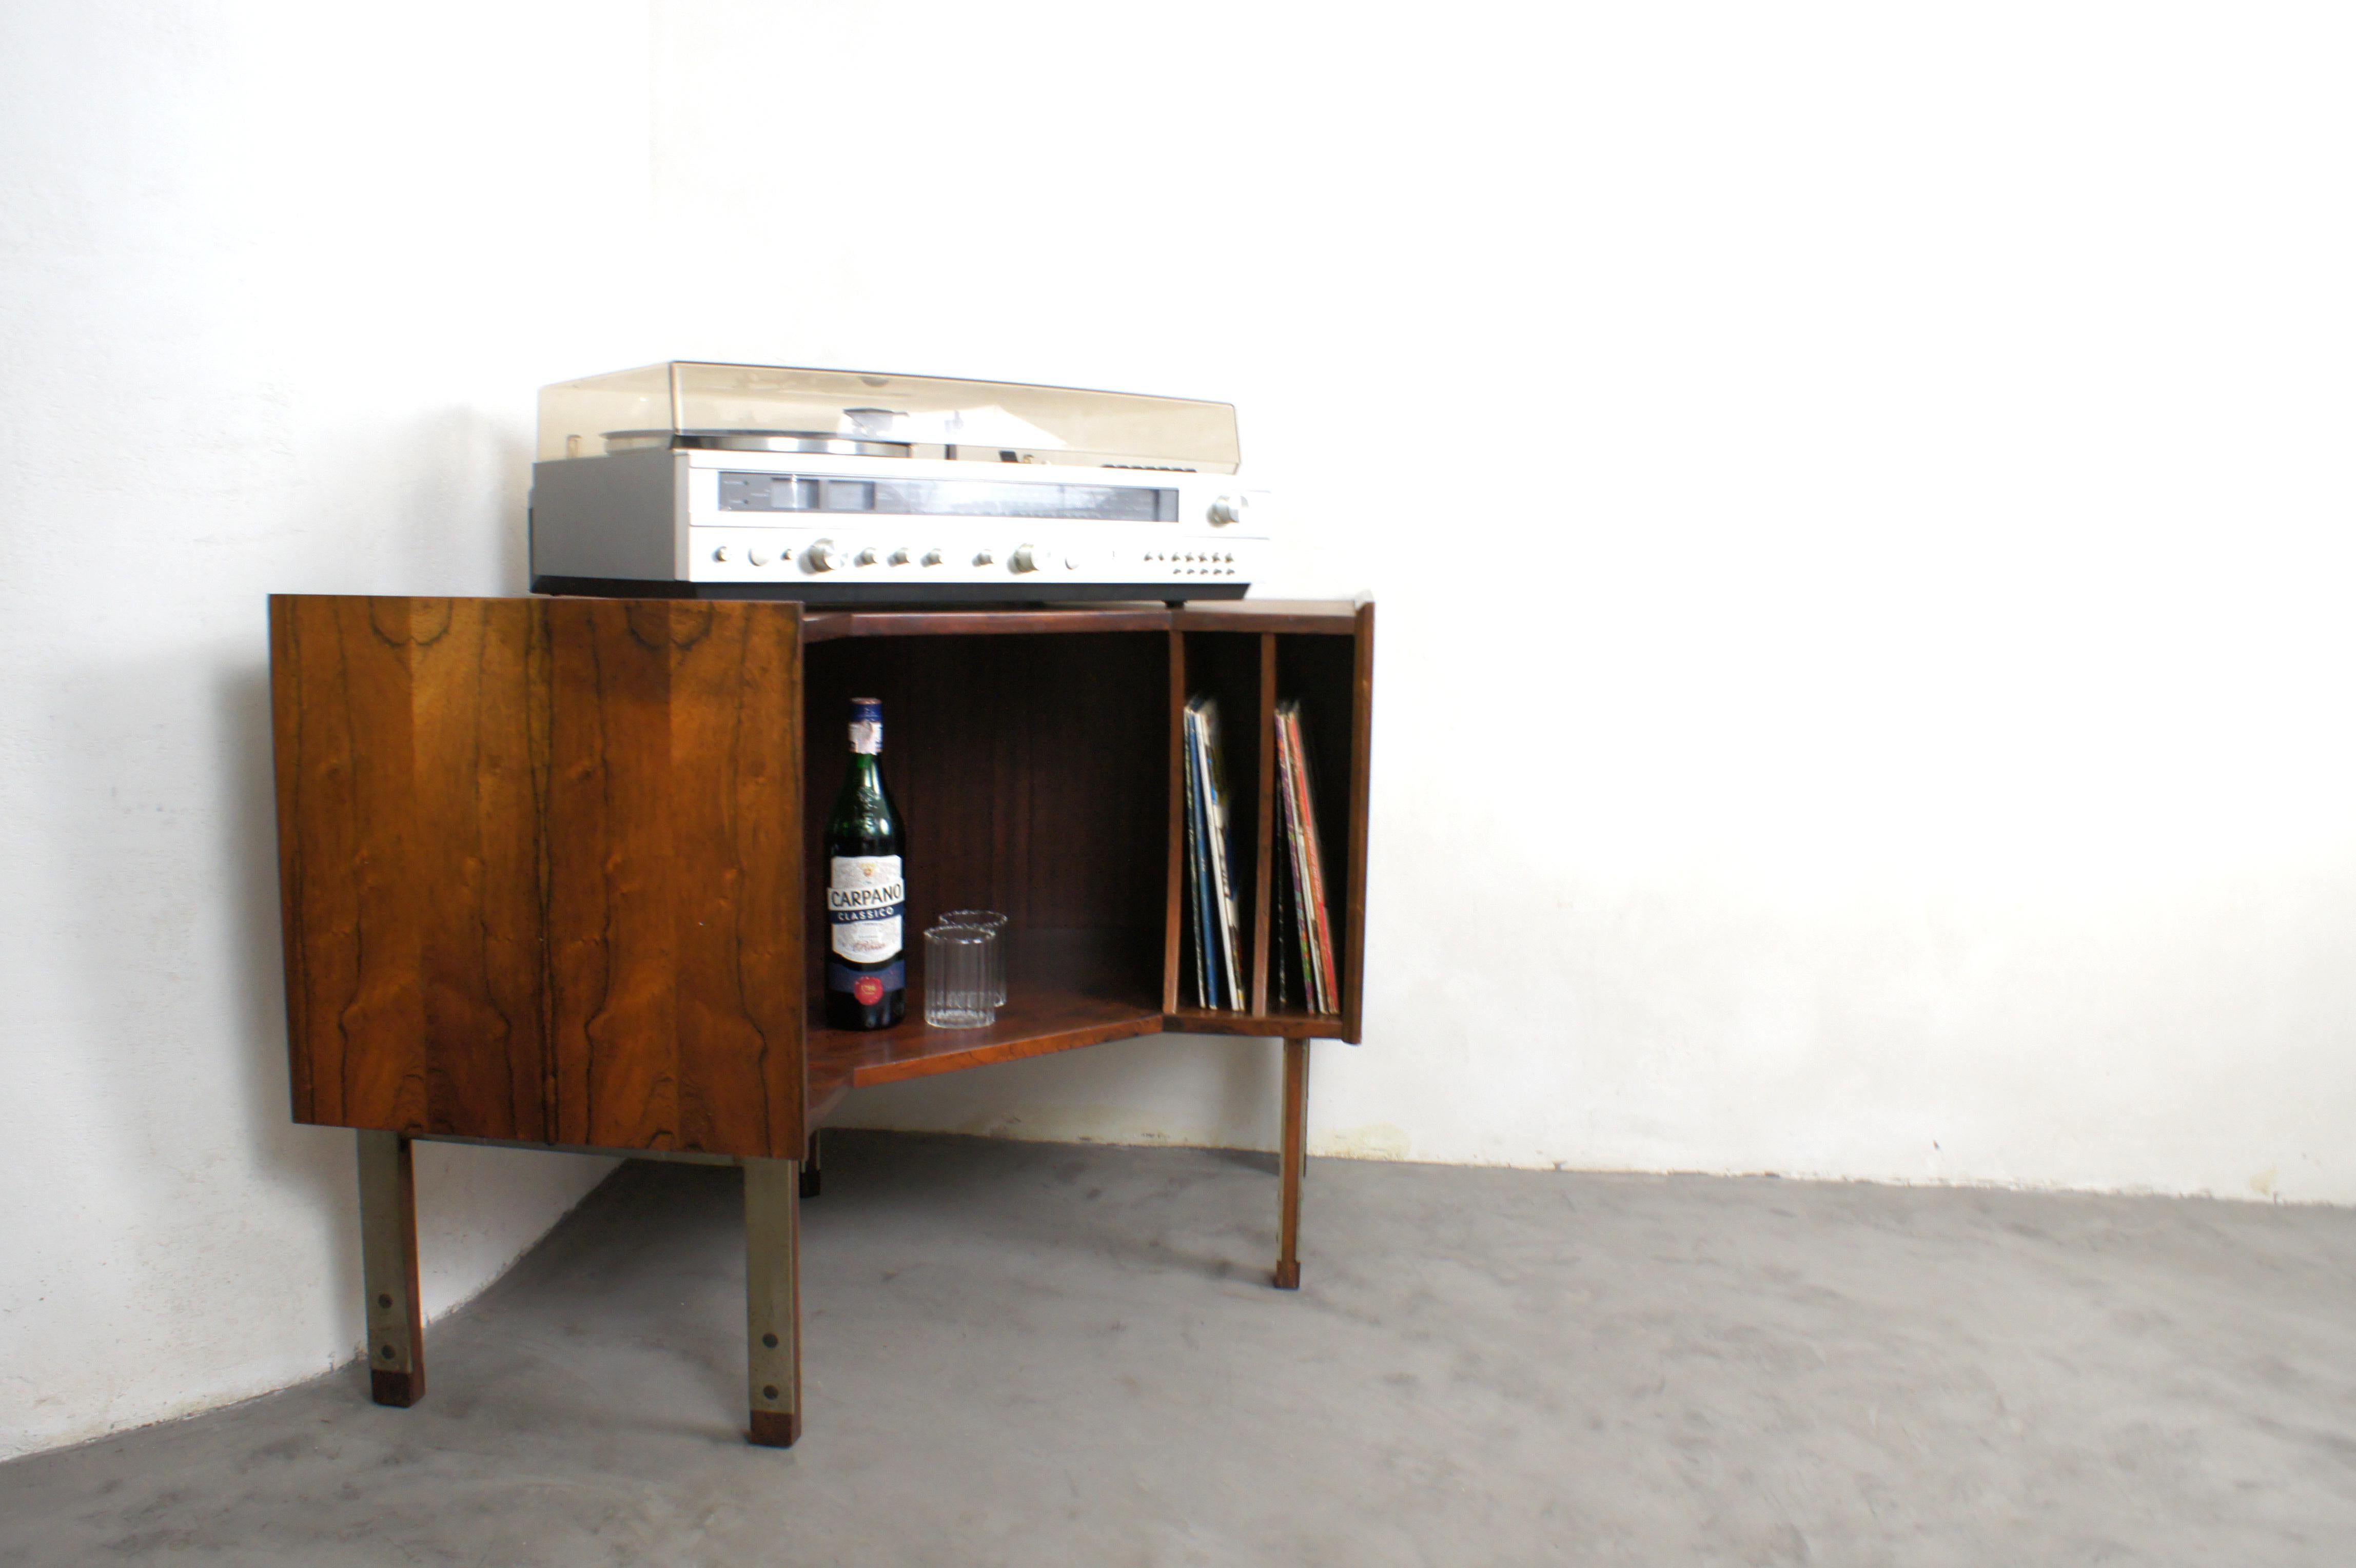 Italian-made corner bar-stereo cabinet from the 1960s.

Side space underneath for vinyl storage, interesting top shape suitable for accommodating Hi-Fi playback systems, storage space underneath perfect for bar use.
The shape of the cabinet makes it